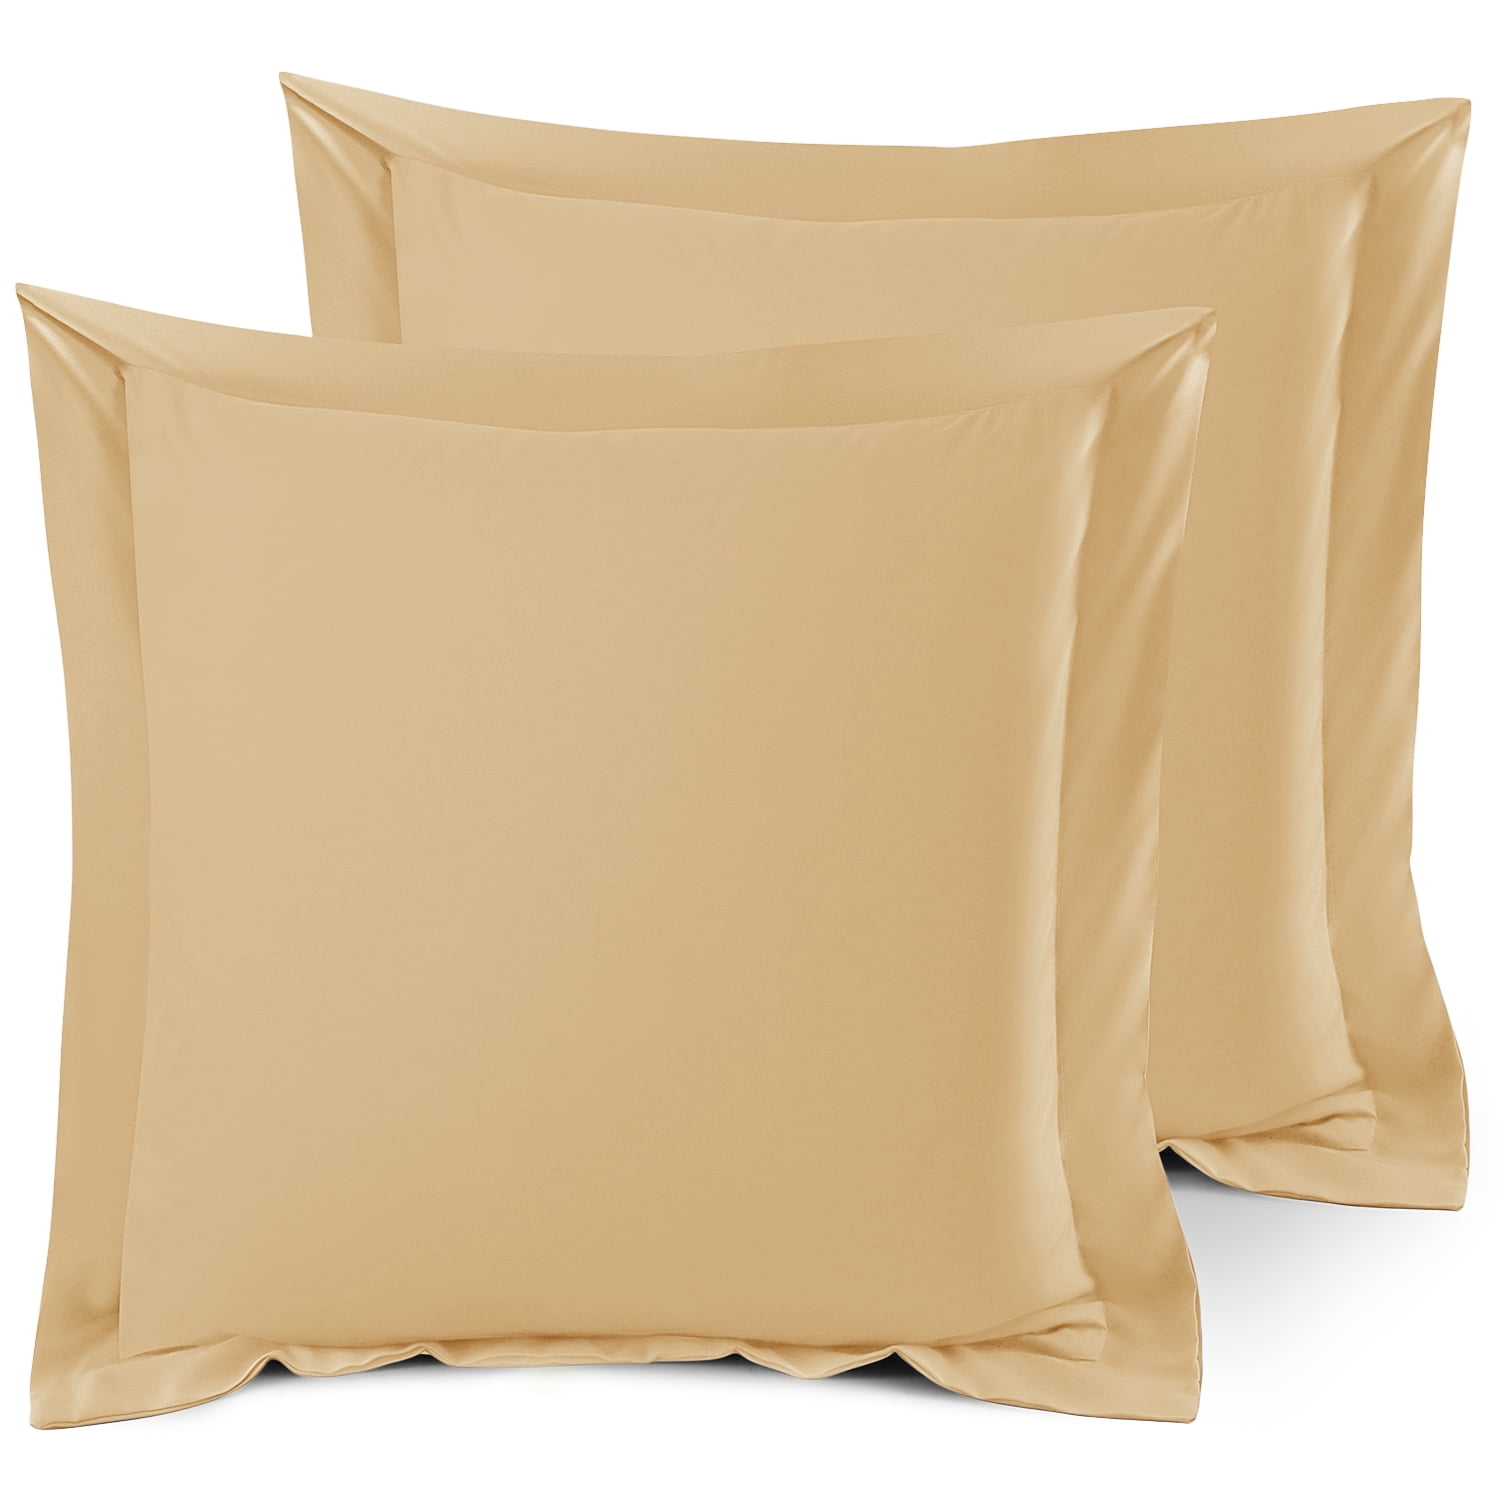 Set of 2 Euro 26"x26" Size Pillow Shams Camel Gold, Hotel Luxury Soft Double Brushed Microfiber, Hypoallergenic, Bed Pillow Cases Cover